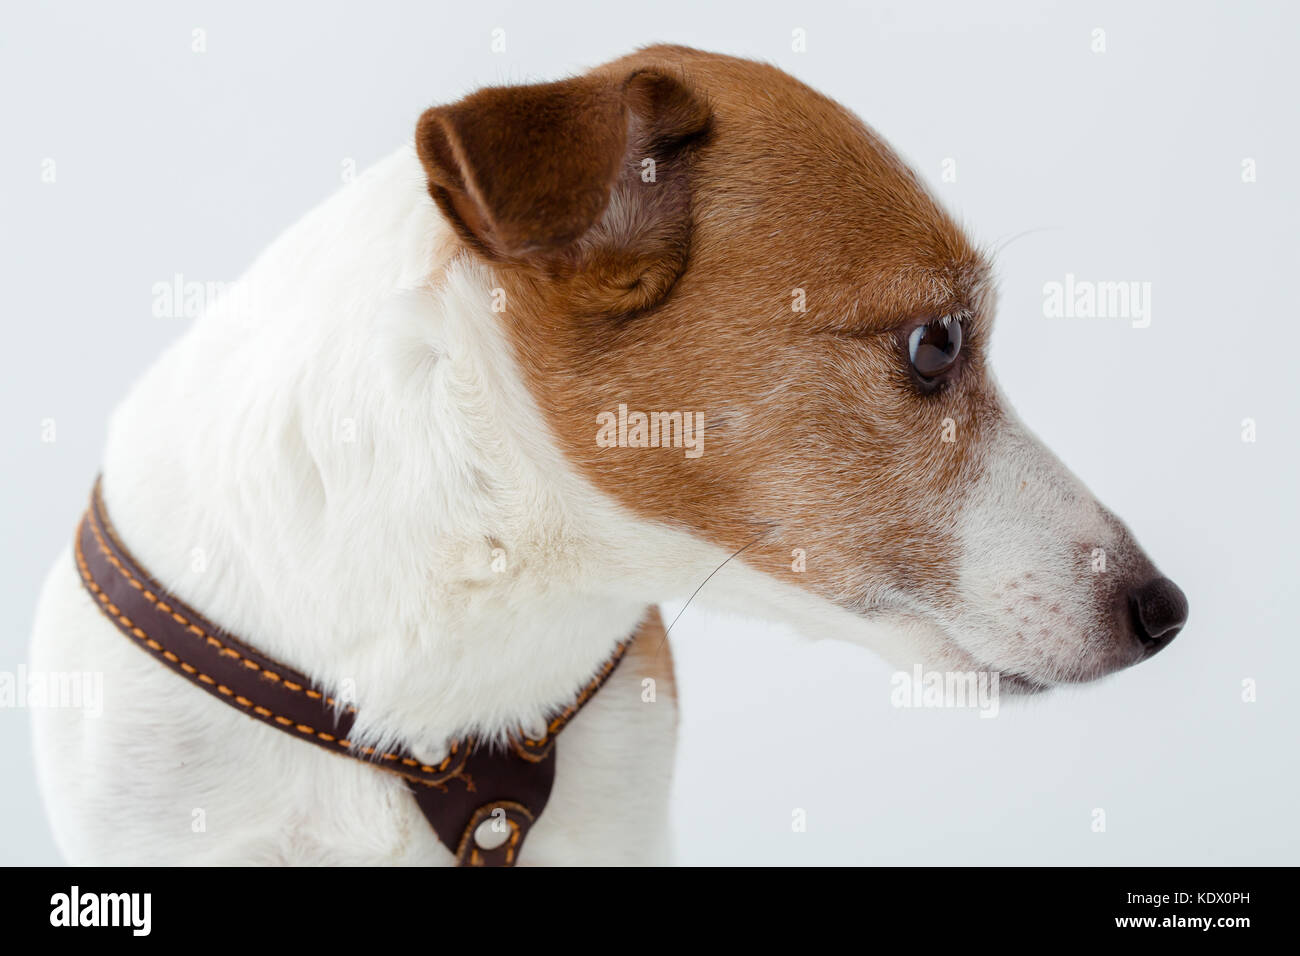 Cute dog sitting on a white background Banque D'Images